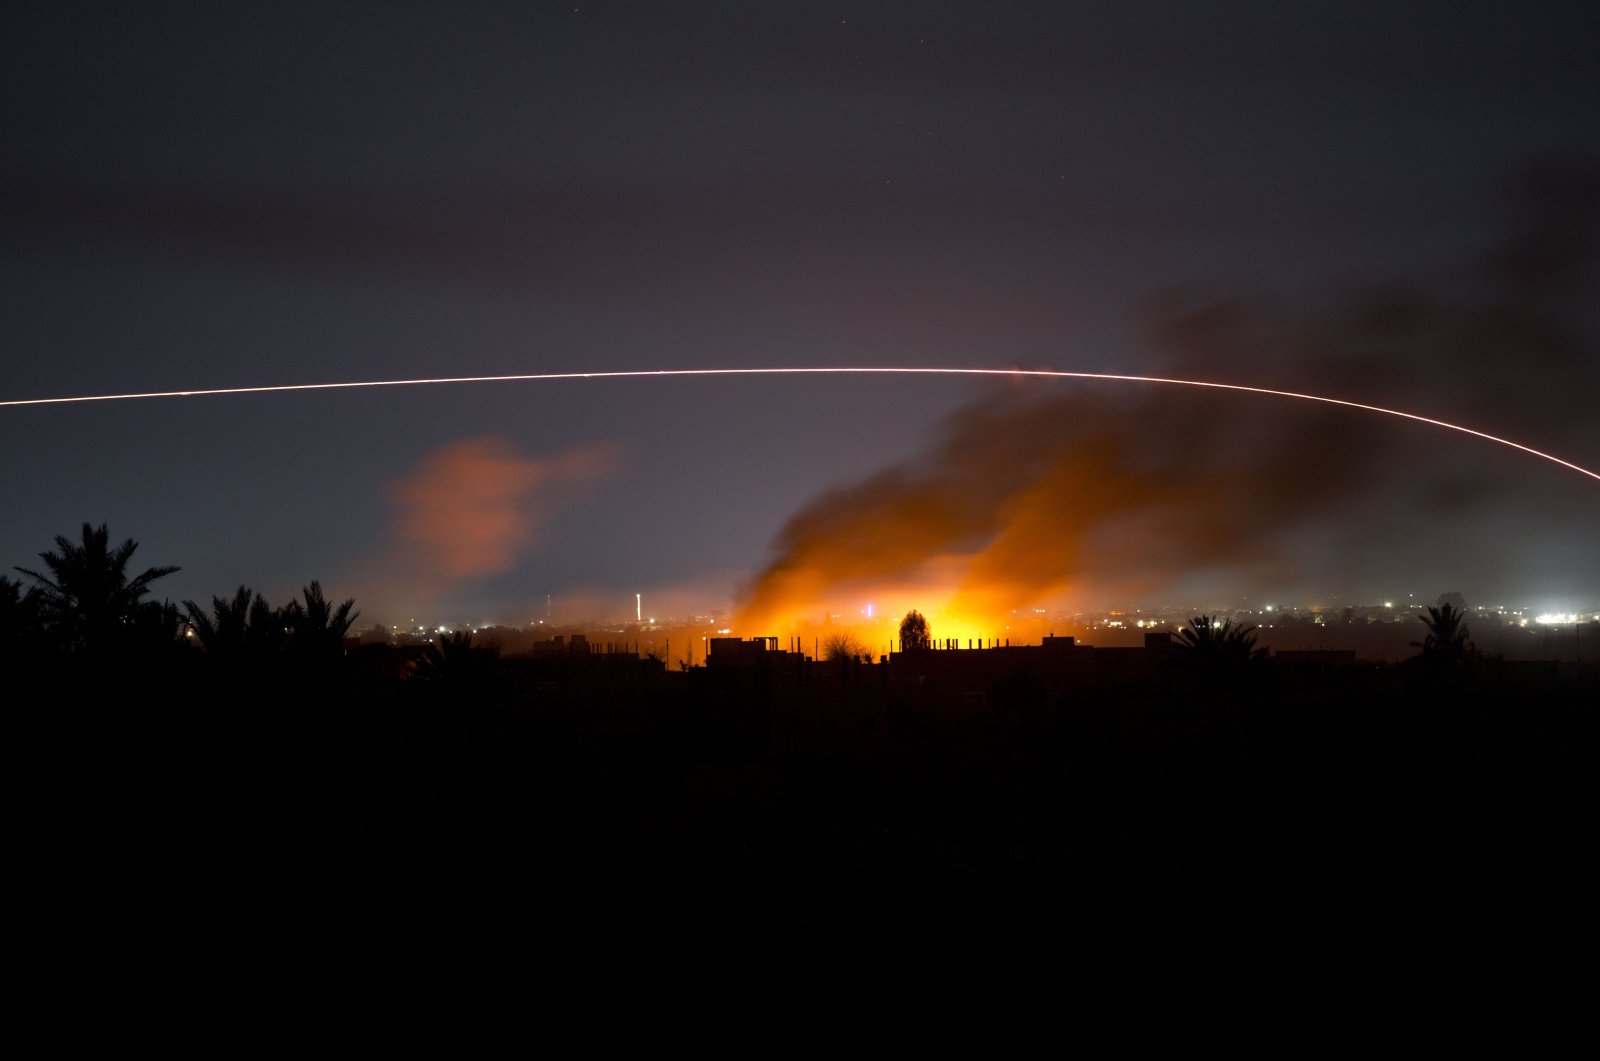 Tracer fire lights up the night sky as U.S.-backed YPG/PKK terrorists fire on the Daesh-held village of Baghouz, Syria, Tuesday, March 12, 2019. (AP File Photo)